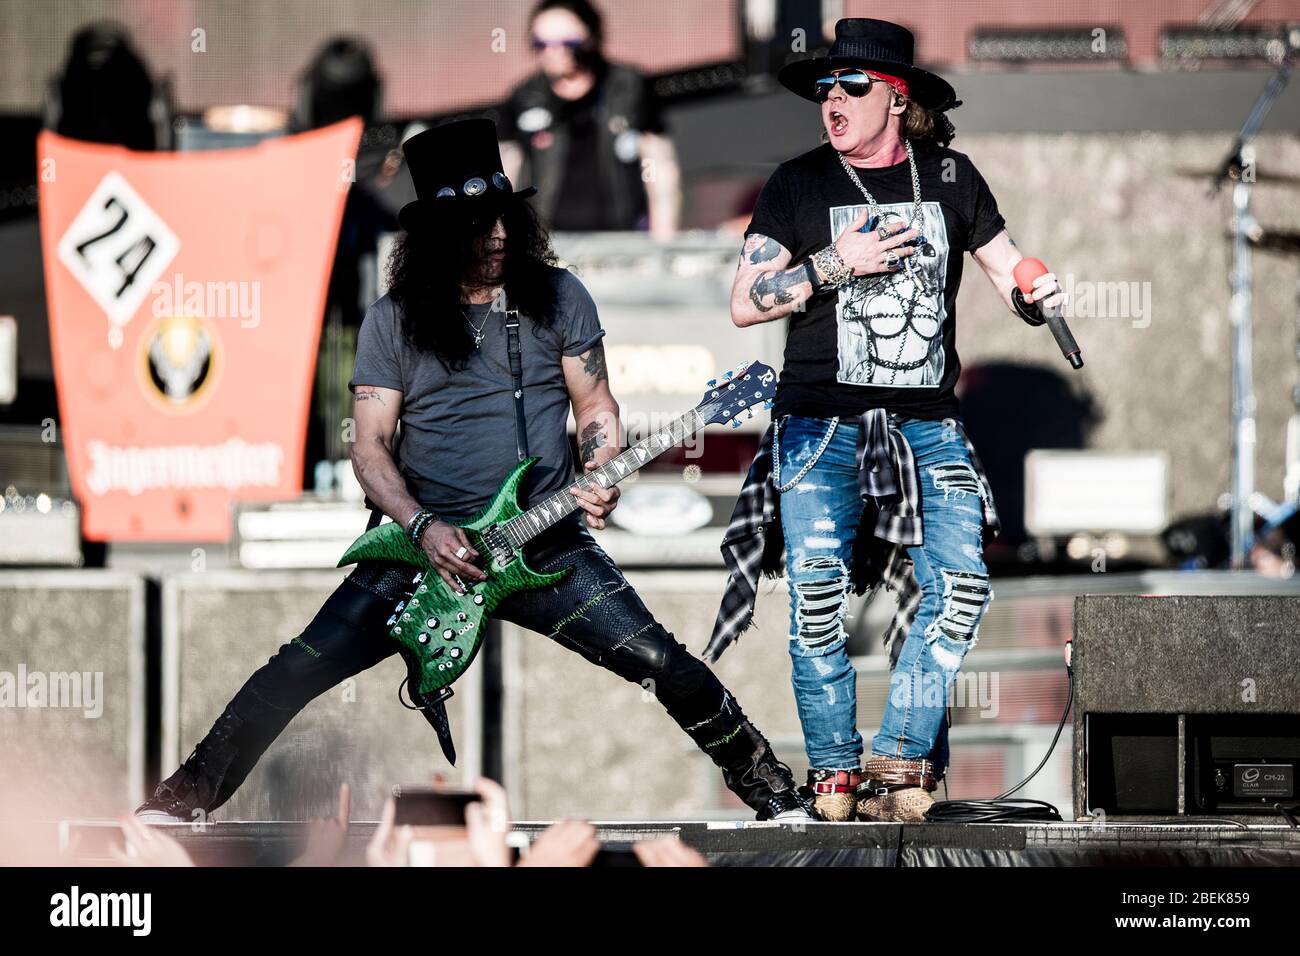 Odense, Denmark. 06th, June 2018. The American rock band Guns N' Roses  performs a live concert at Dyrskuepladsen in Odense. Here vocalist Axl Rose  is seen live on stage with guitarist Slash. (